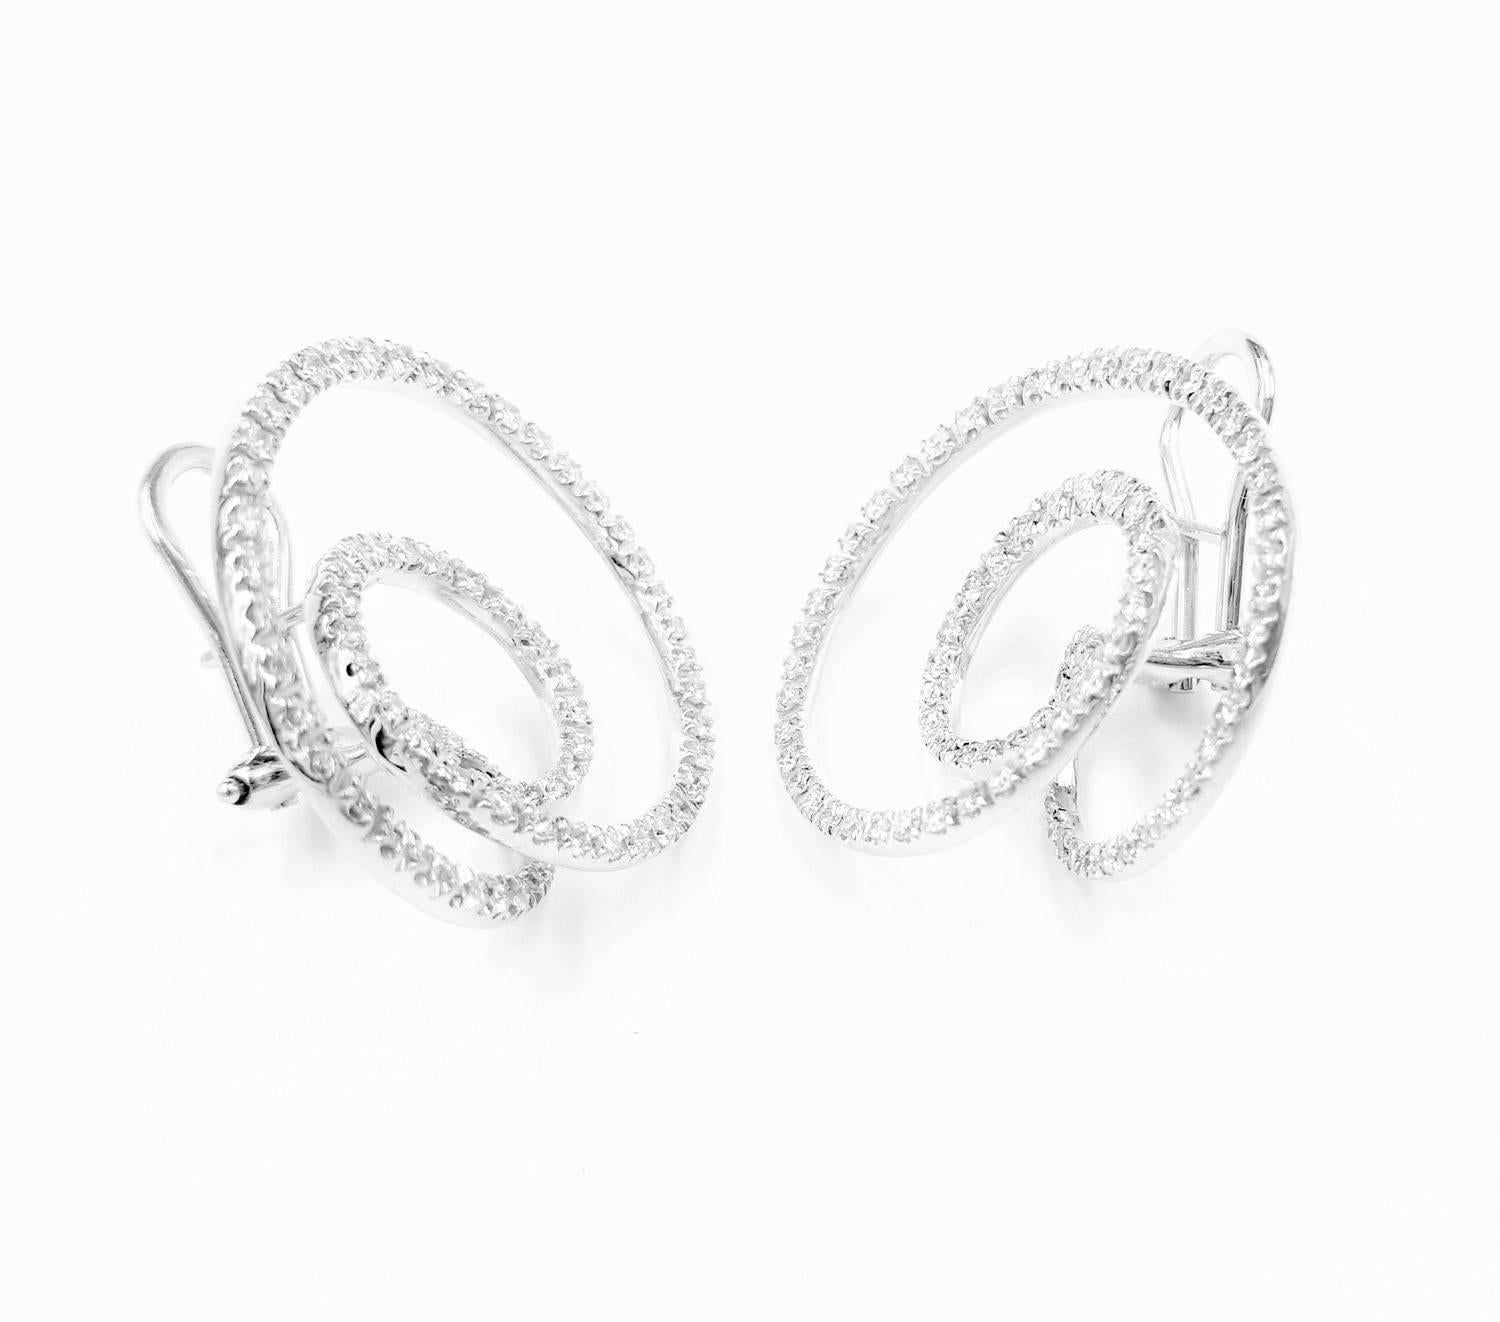 Tous Lyra Italy Swirl 3.50 Carats of Diamonds Set in 18kt White Gold Earrings In New Condition For Sale In Scottsdale, AZ